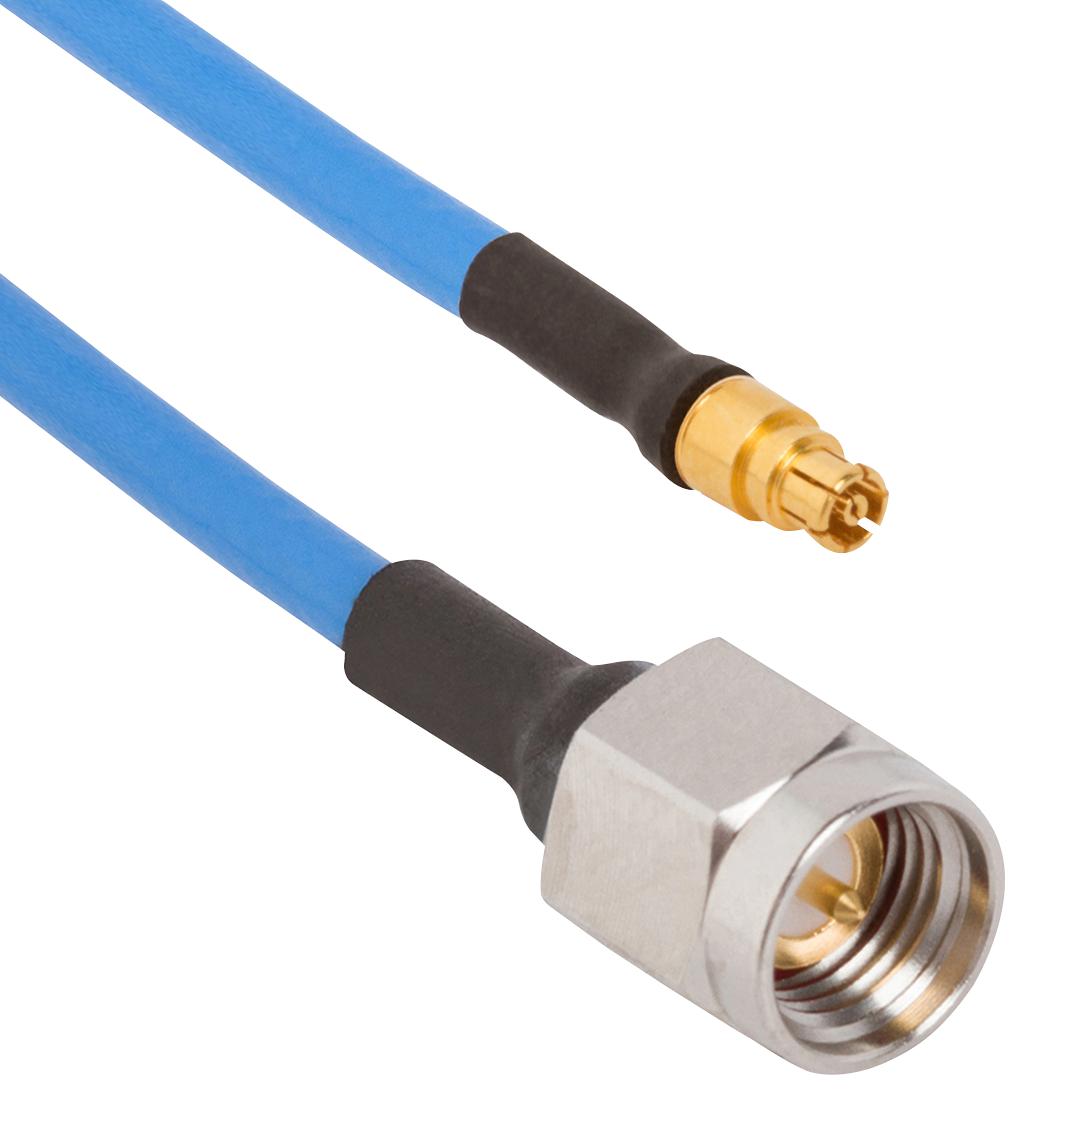 Amphenol SV Microwave 7032-7526 Smpm Female To Sma Male Cable Assembly For 0.085 Cable (Oal 6